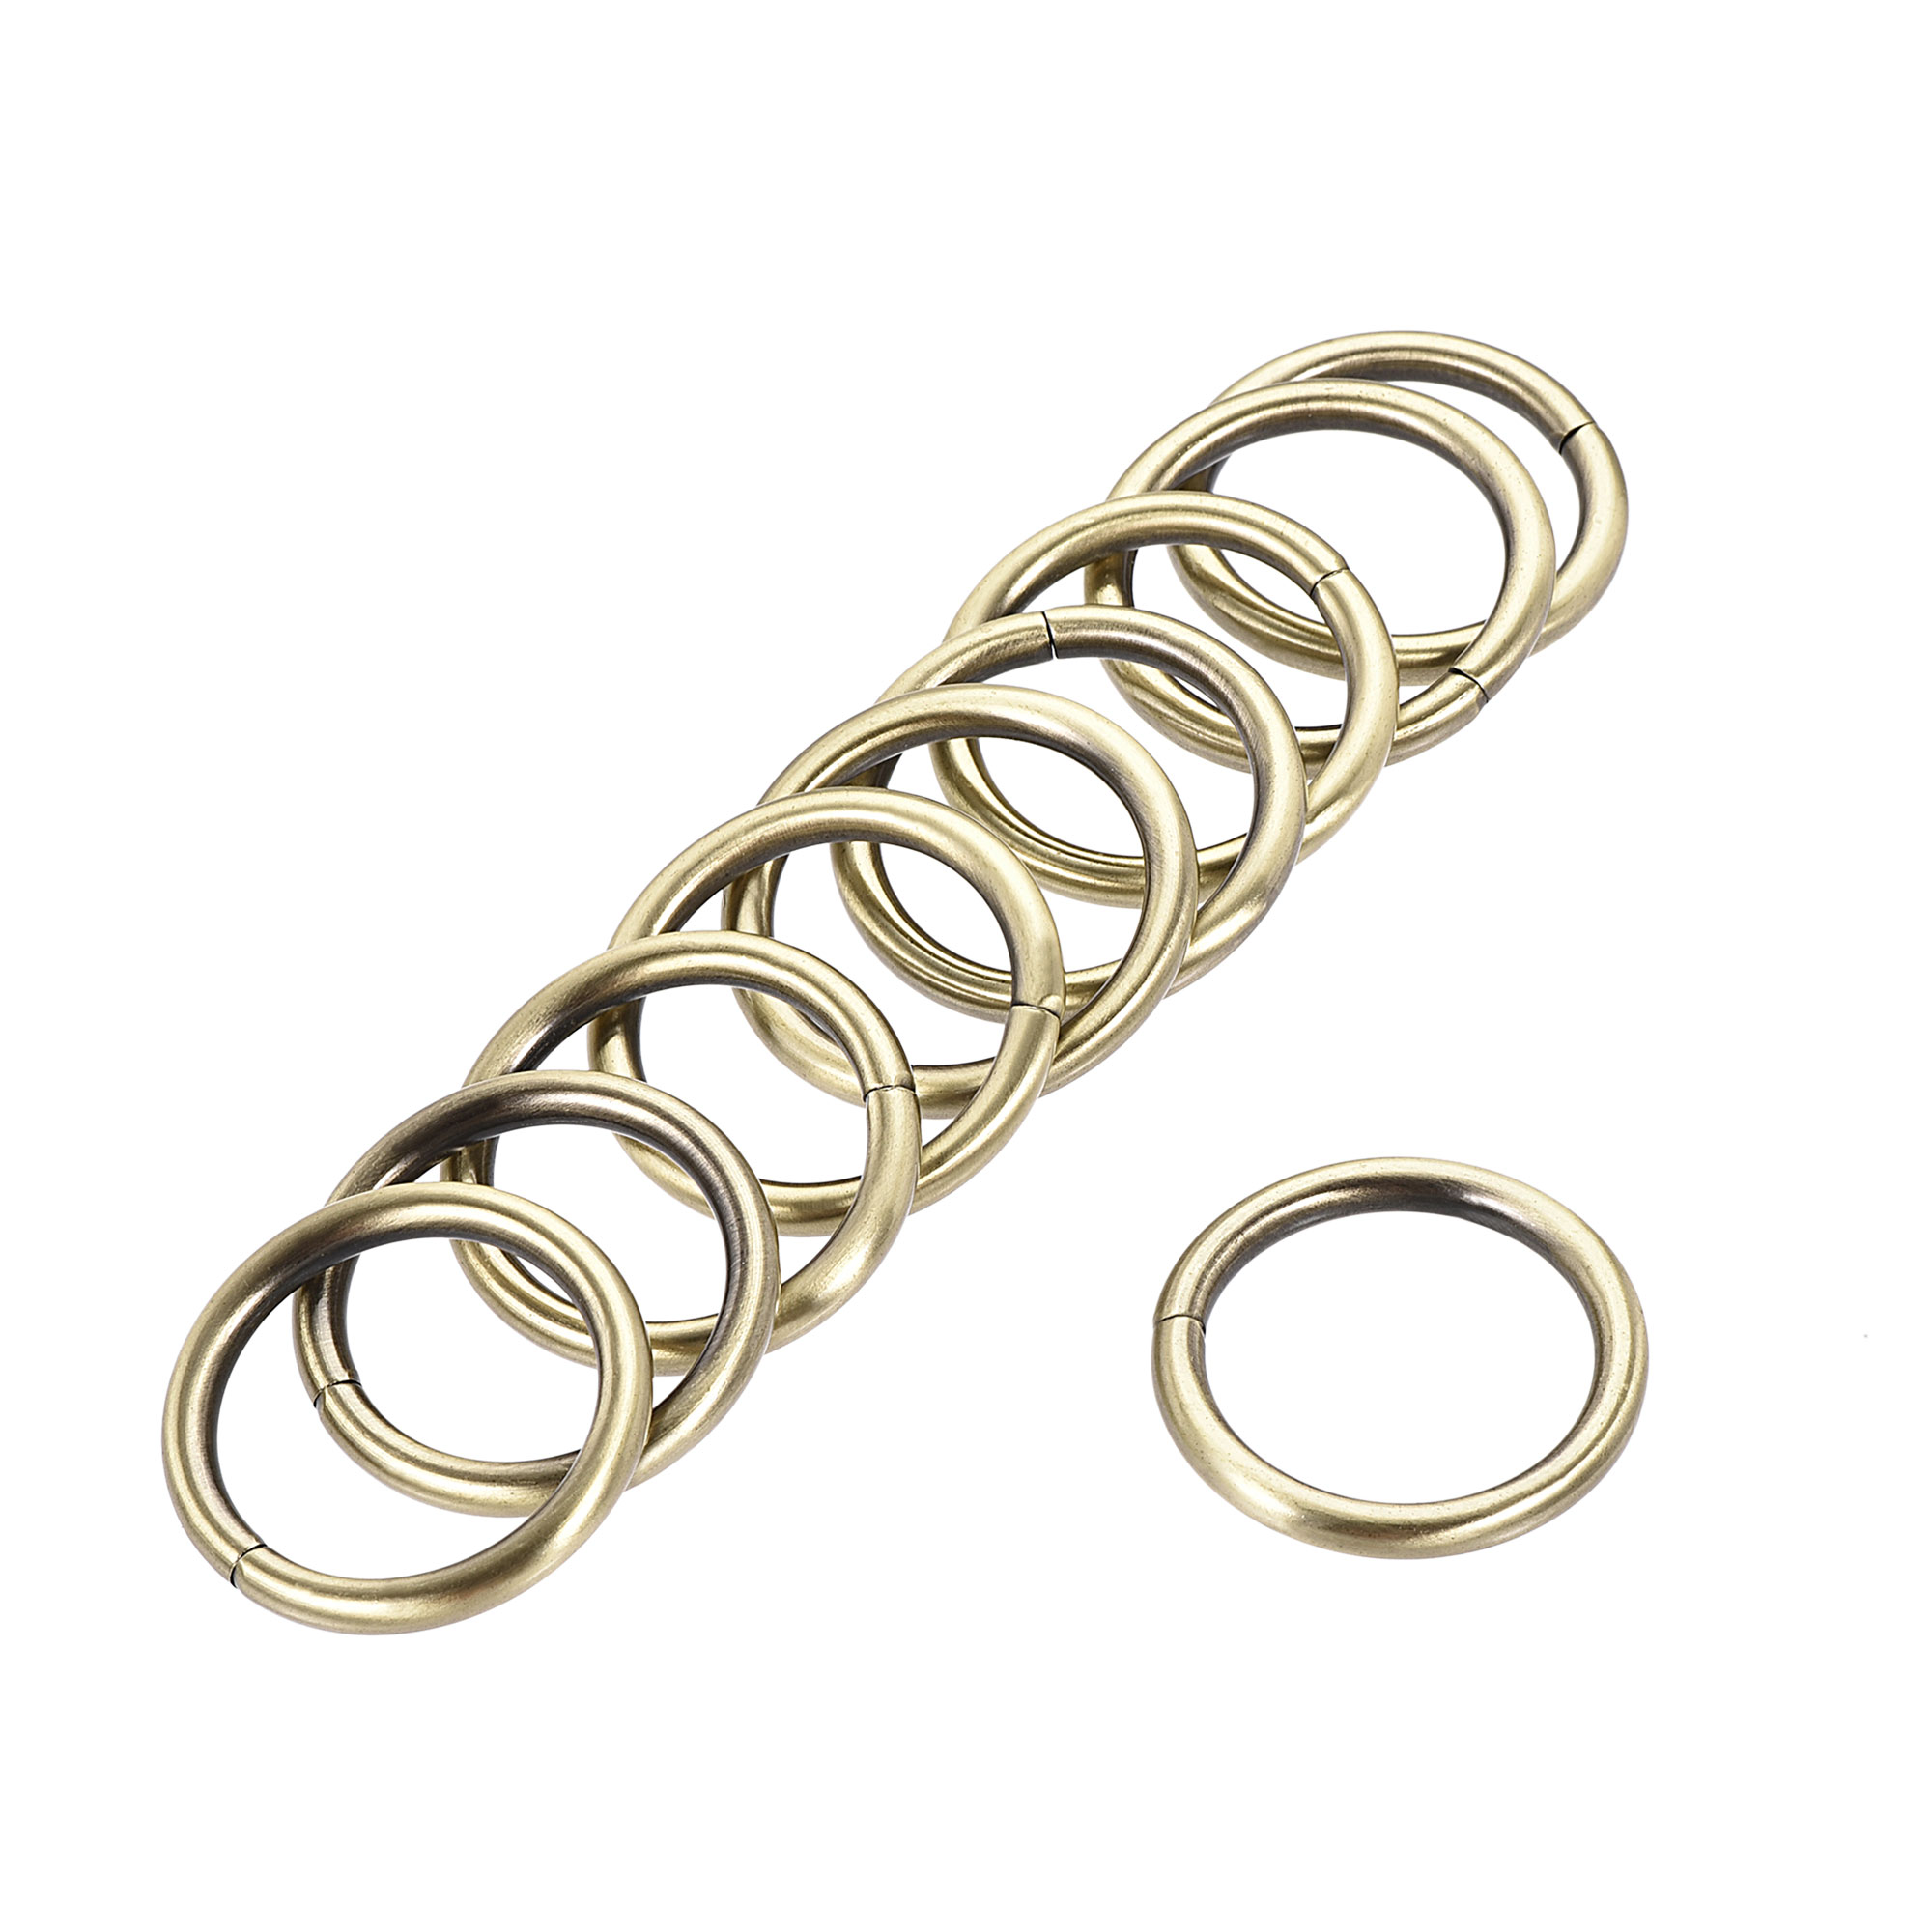 Unique Bargains Metal O Ring 25mm(0.98") ID 3.8mm Thickness Iron Rings for DIY Bronze Tone 15pcs